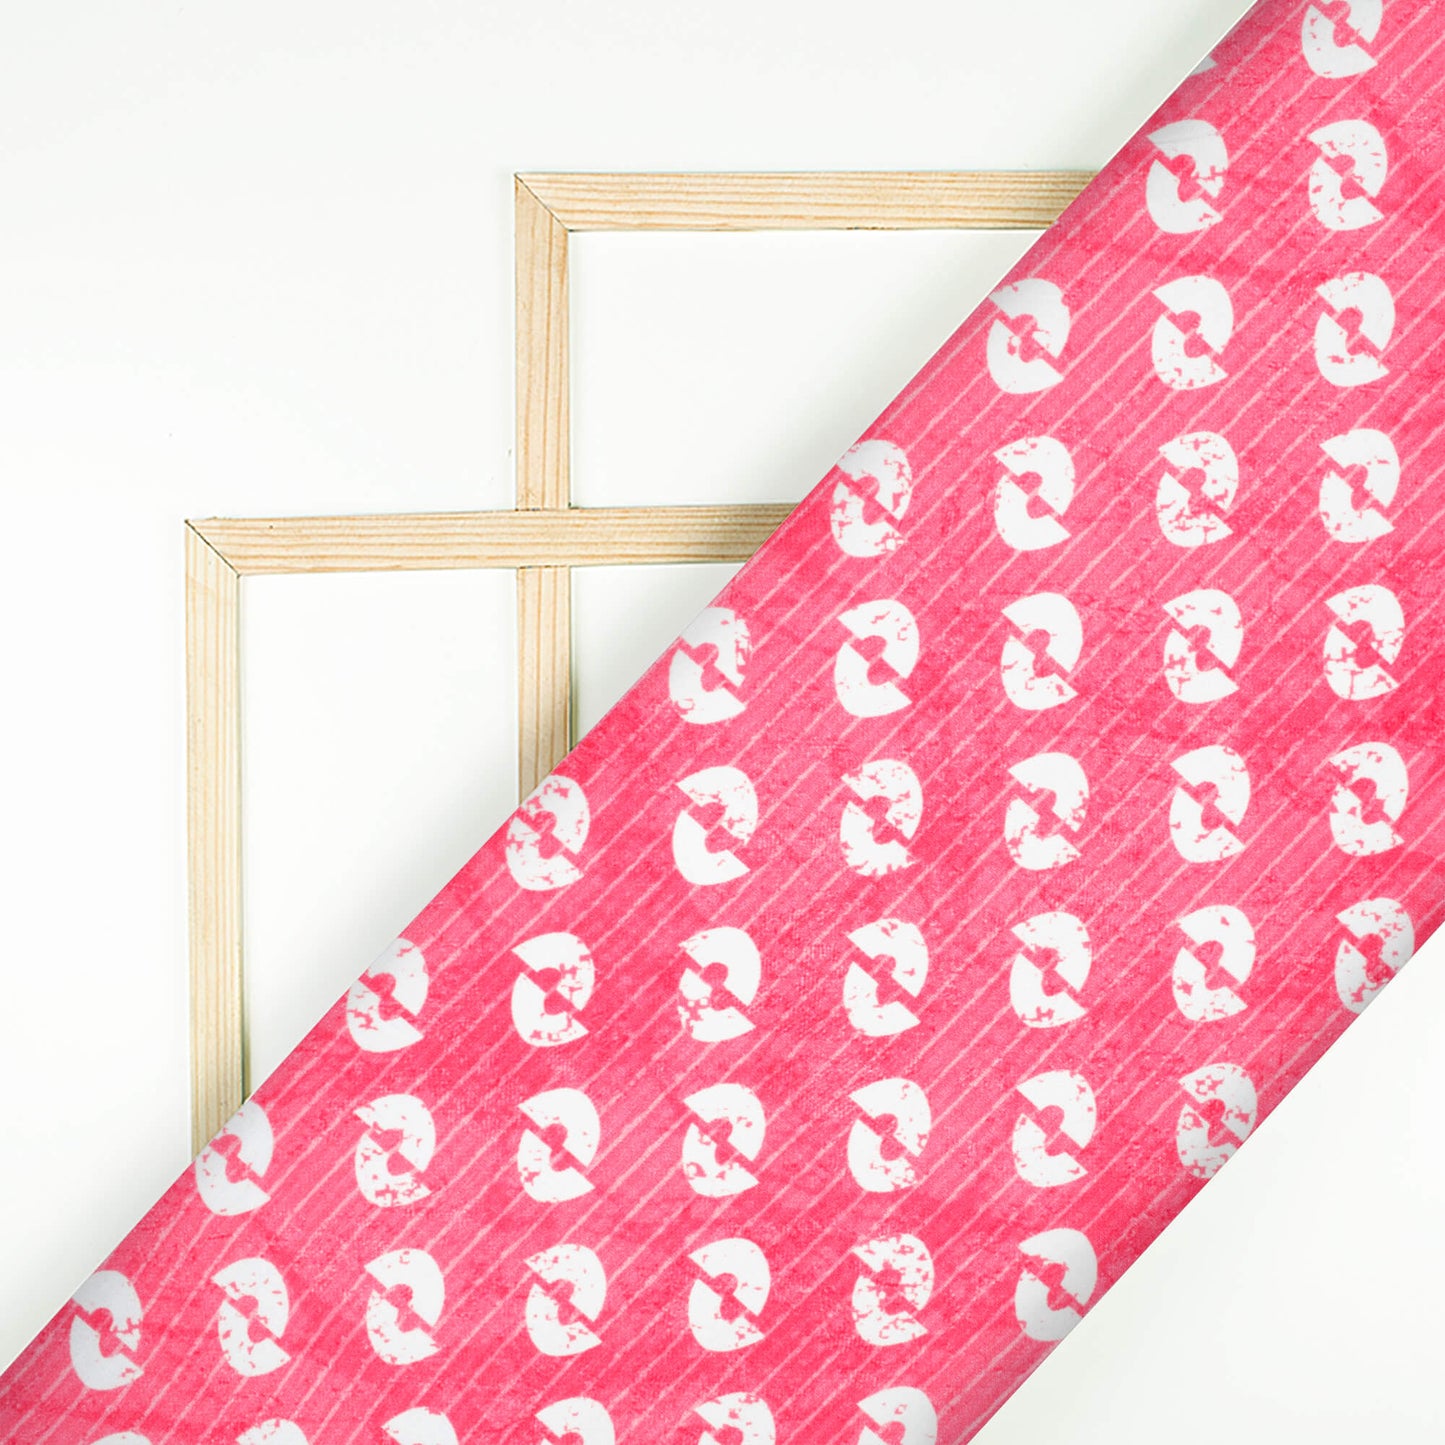 Hot Pink And White Quirky Pattern Digital Print Crepe Silk Fabric